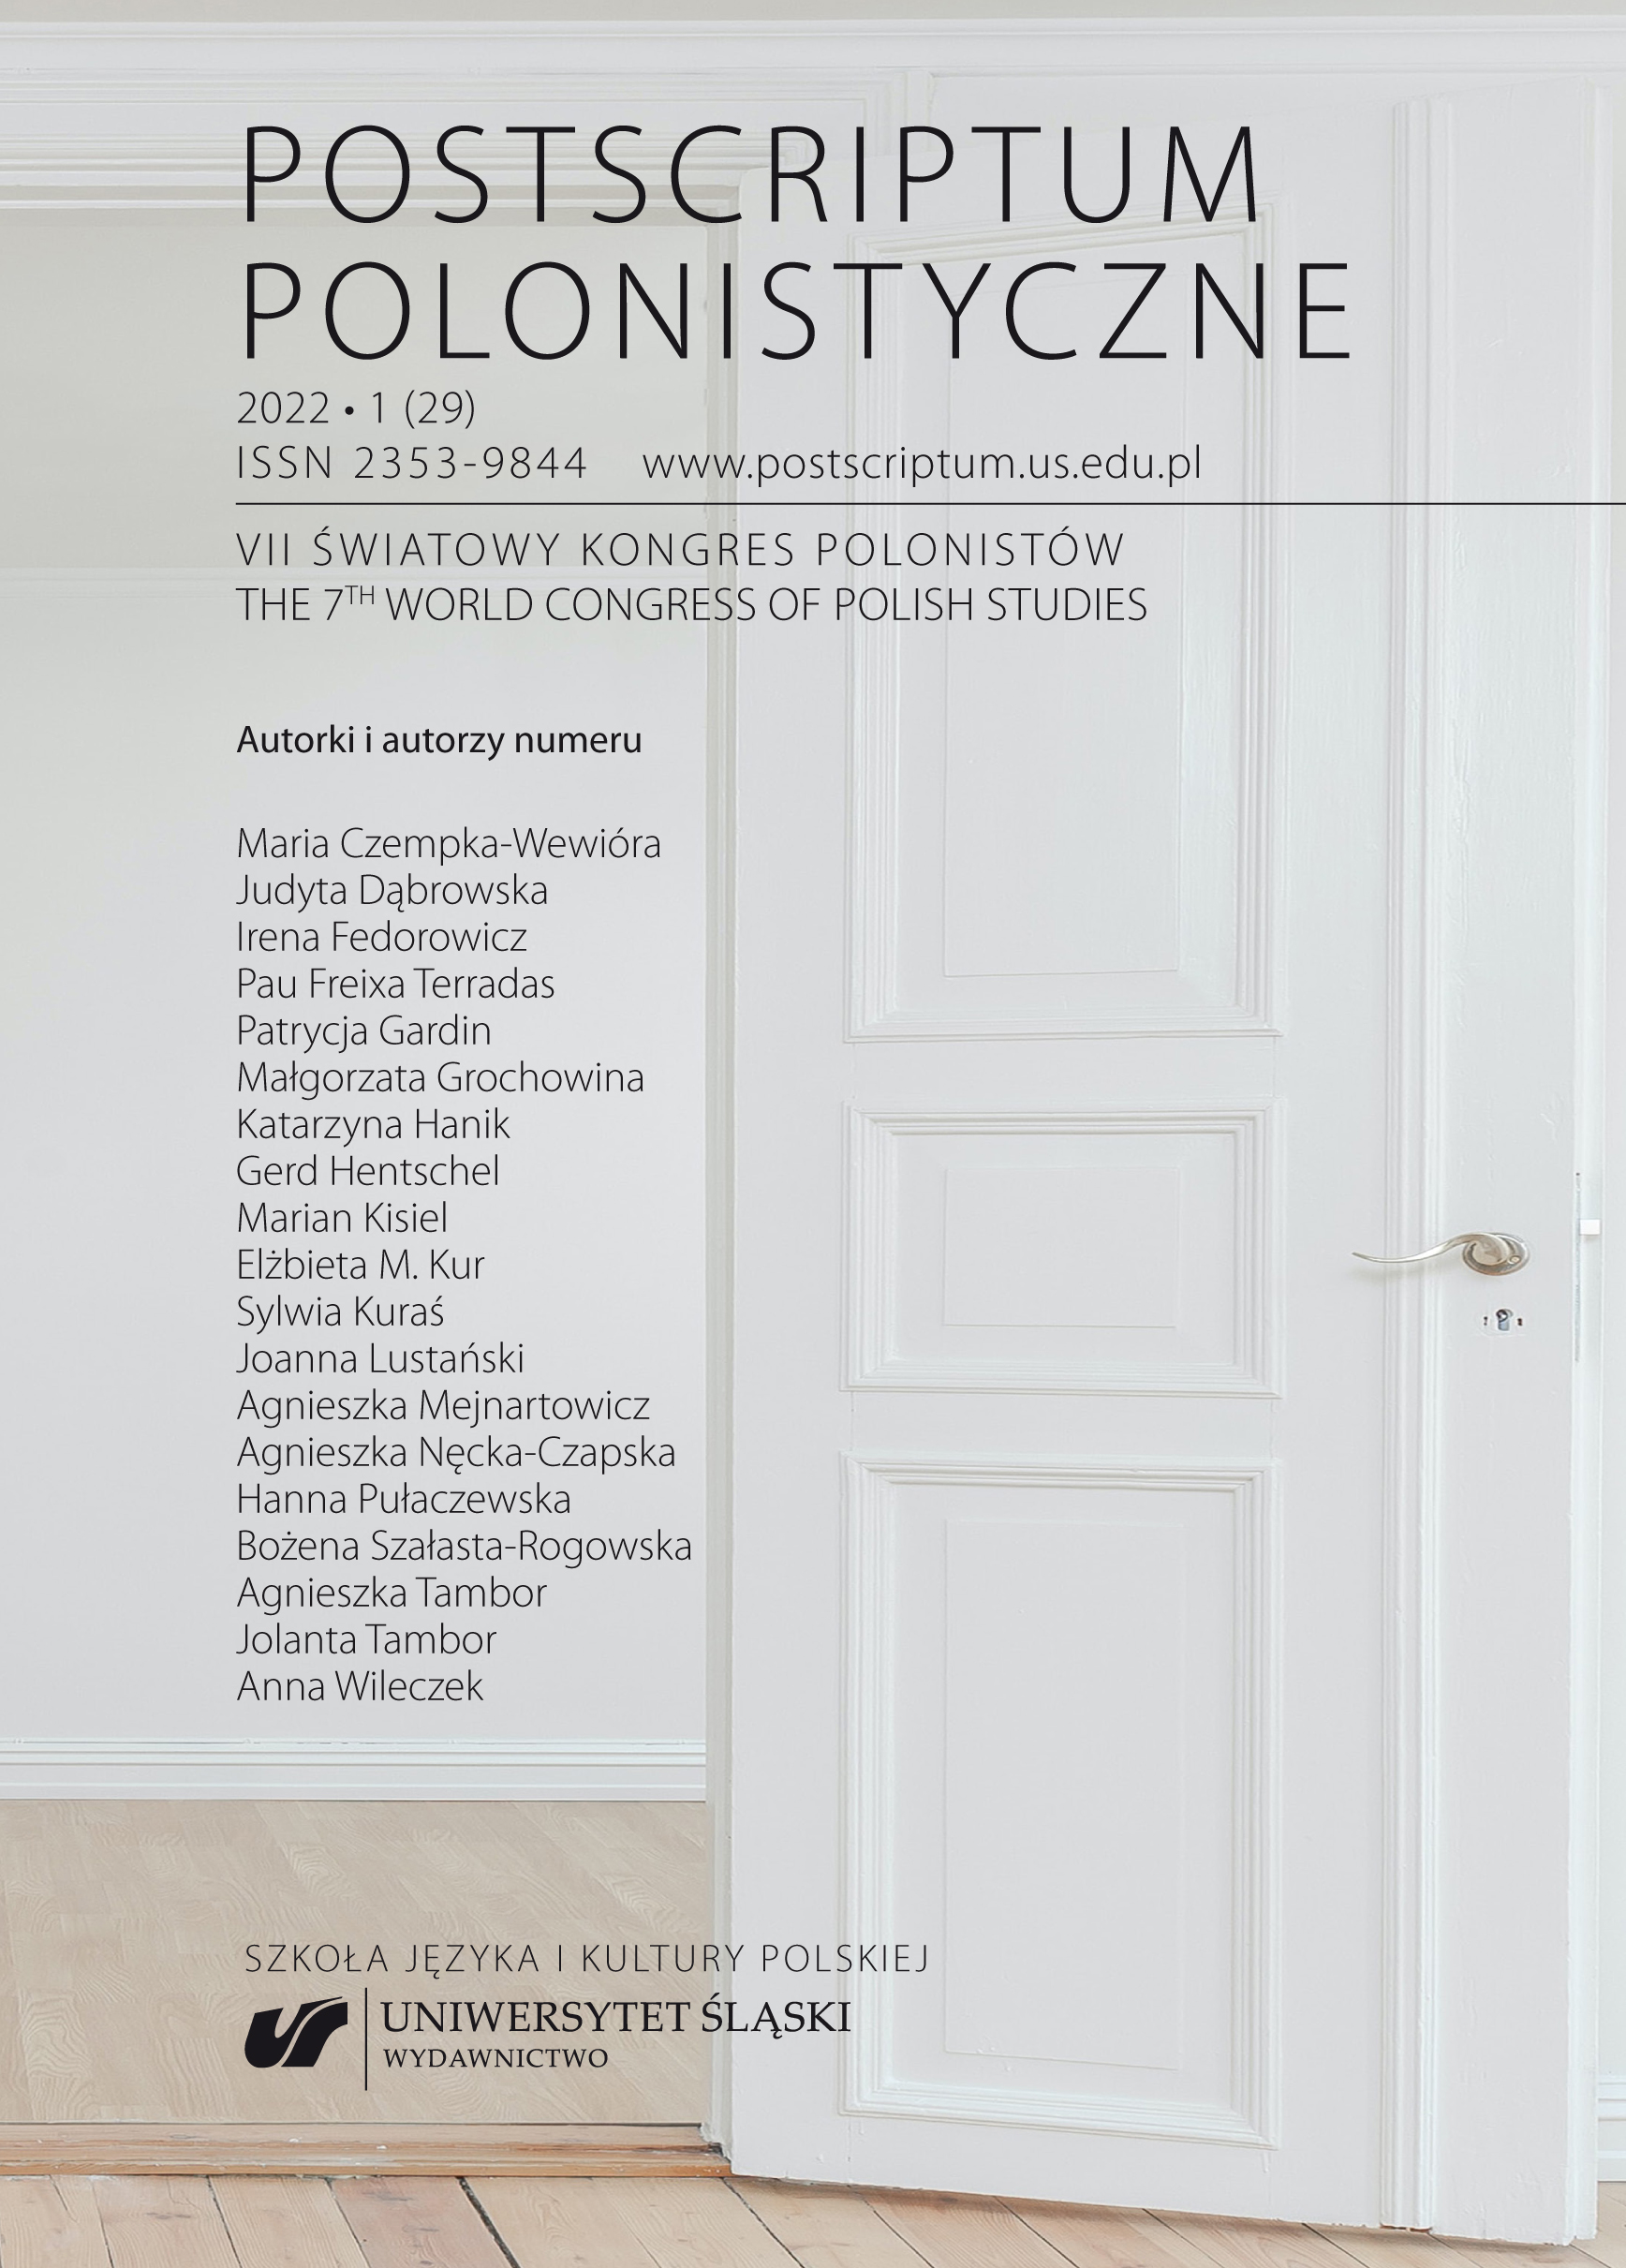 The Barcelona Polish Studies Centre: History of Its Disappearance, Hopes and Prospects in the Context of the Reform of the Structure of Philological Studies in Spain Cover Image